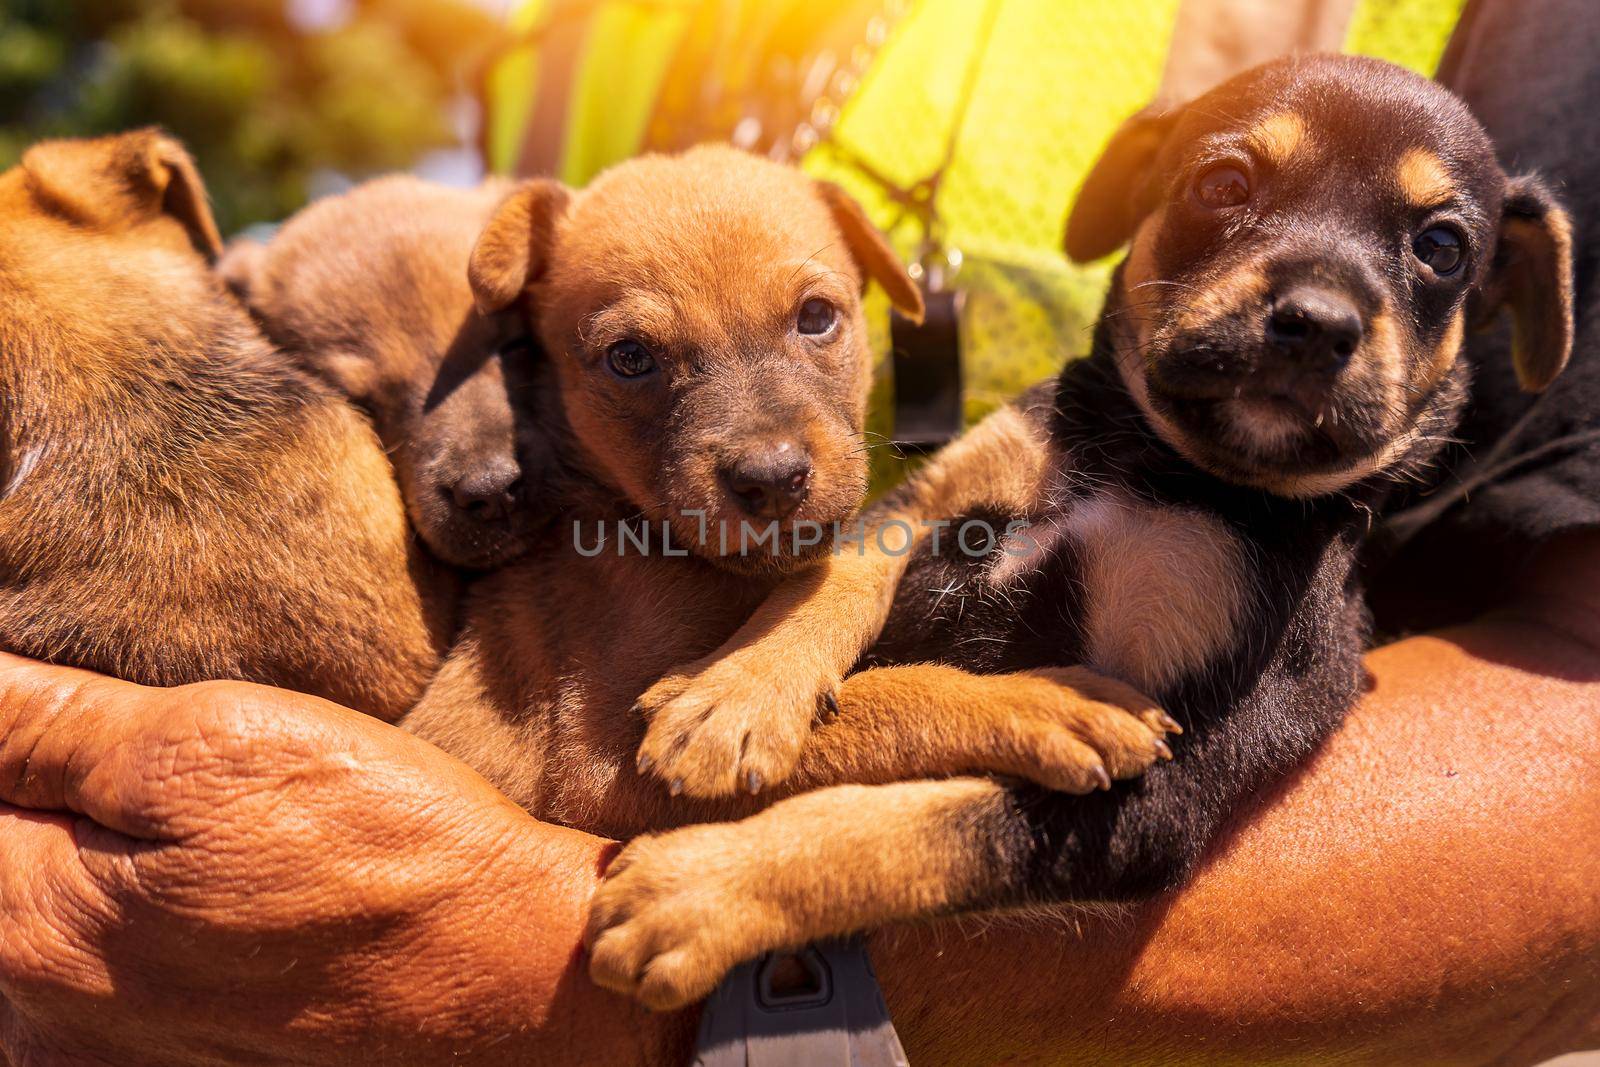 Closeup of a group of dog puppies held in the hands of a Latino man outdoors